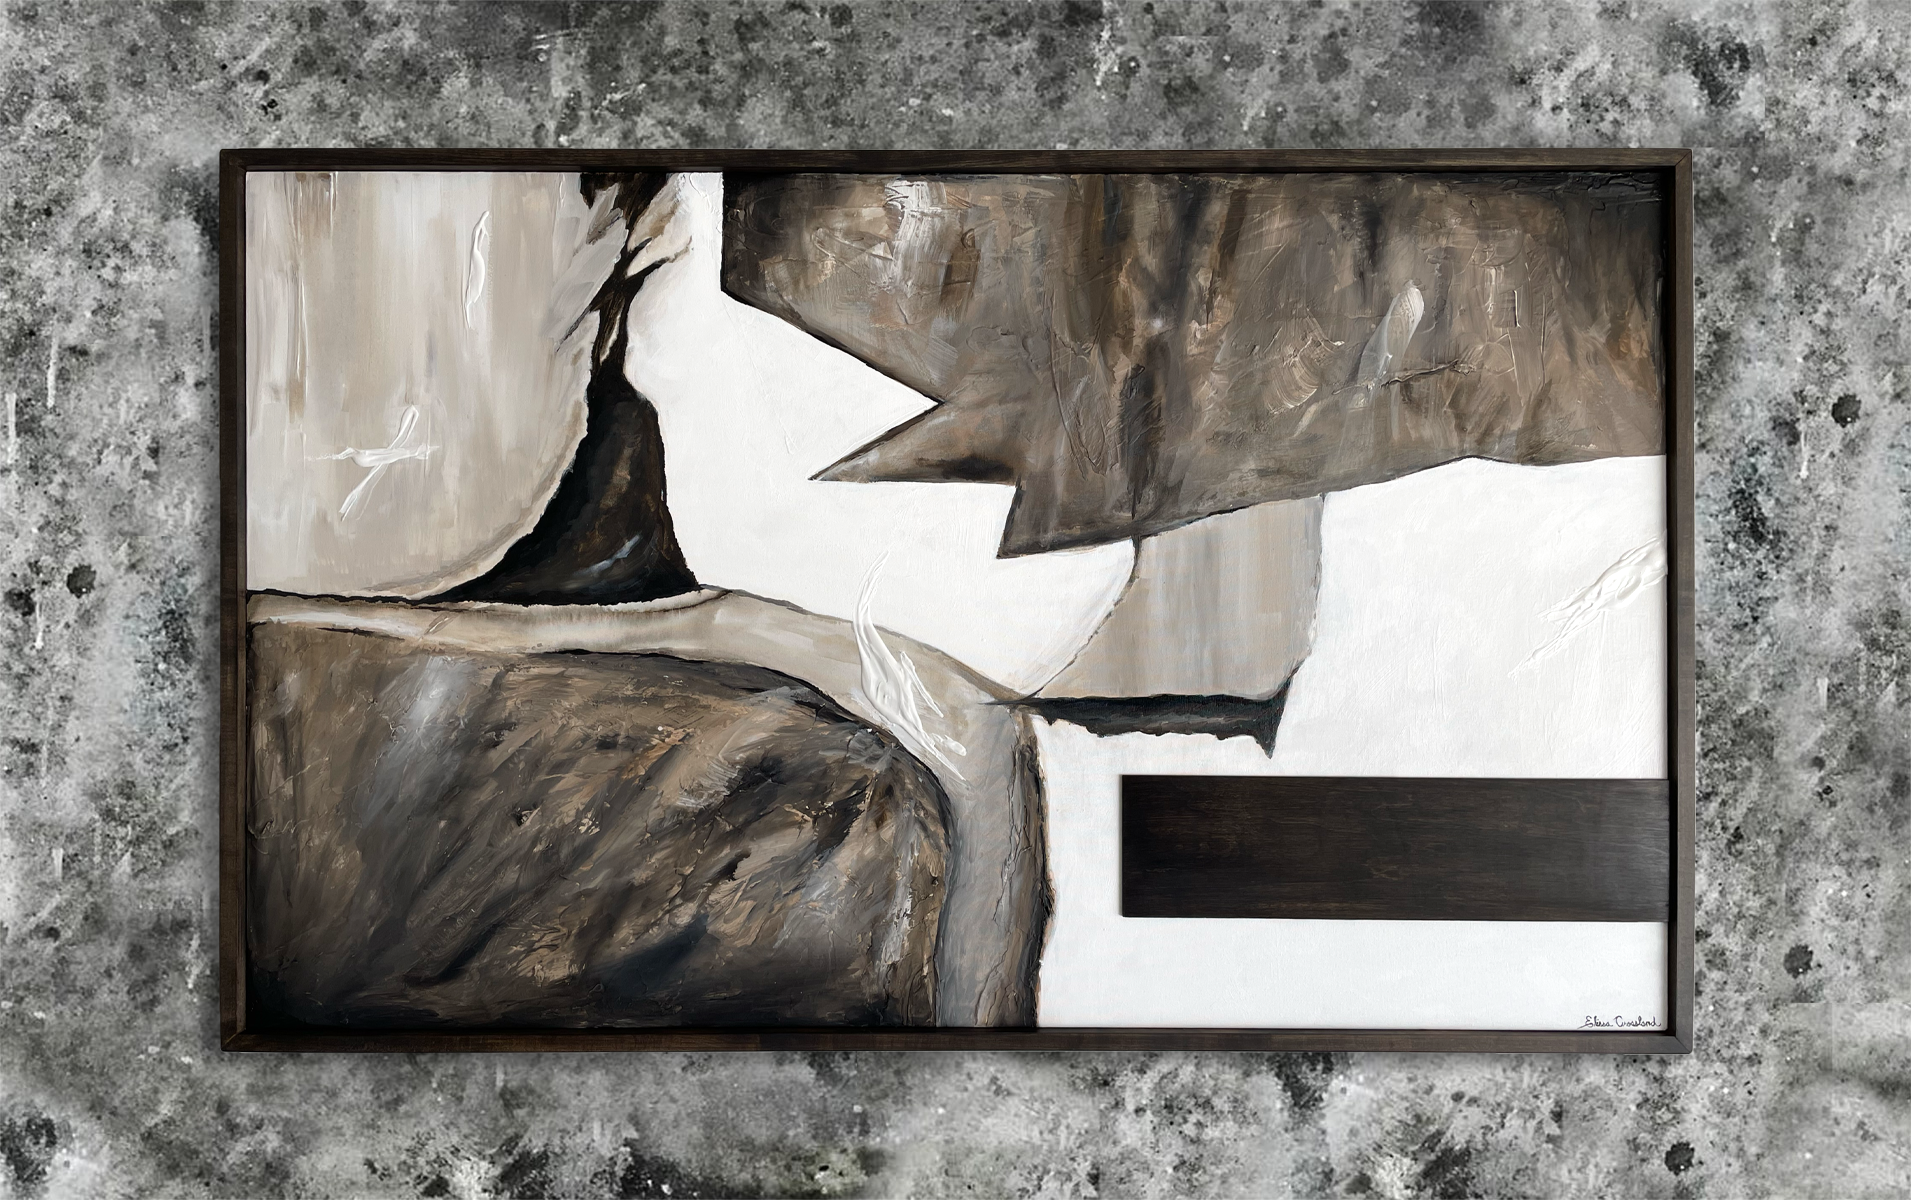 abstract painting 37" x 61" – acrylic with wood details